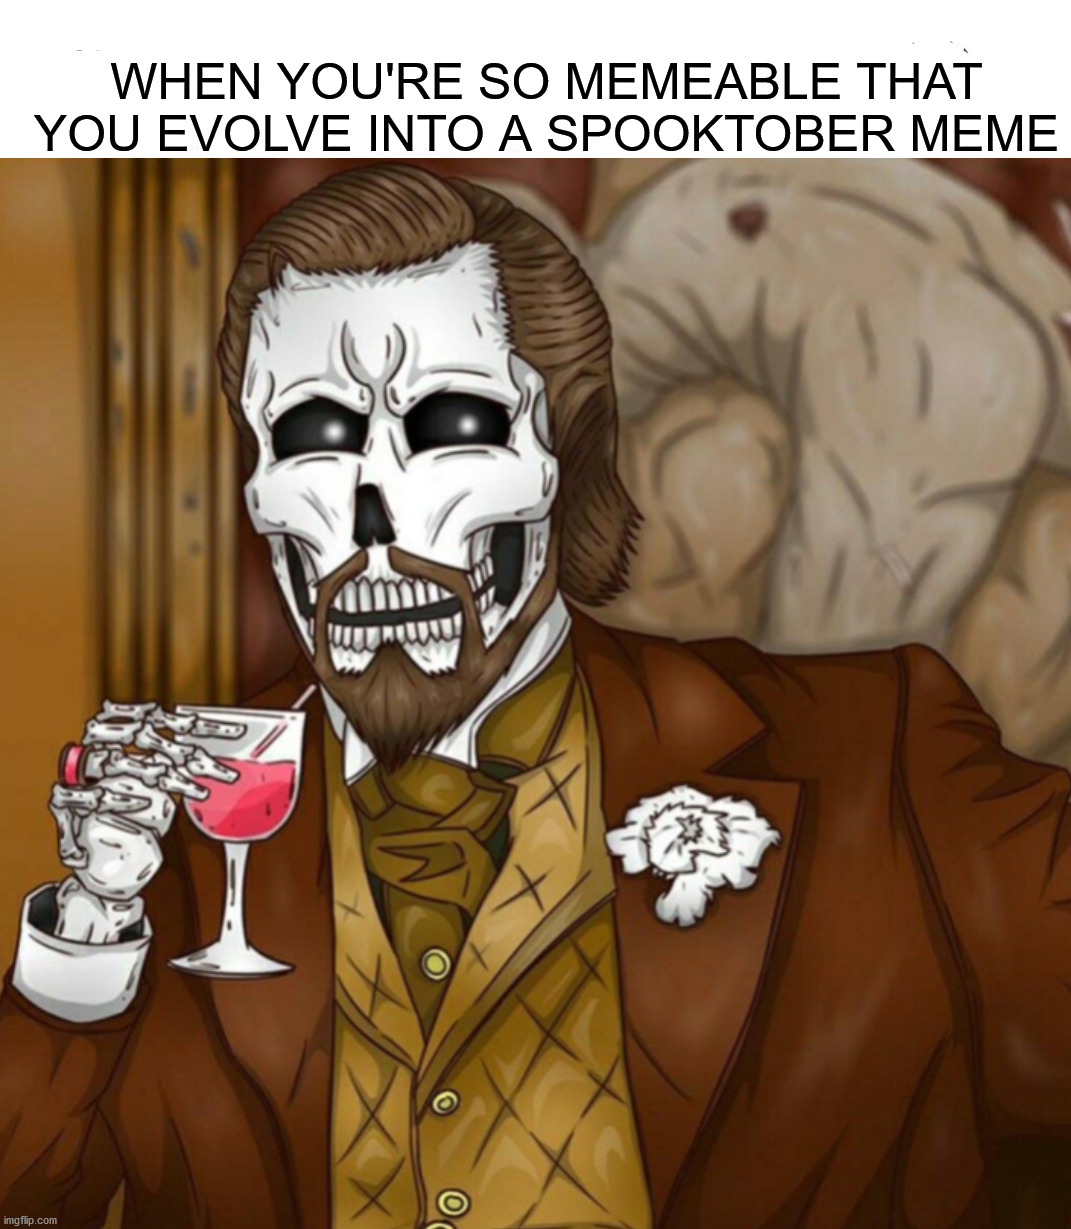 Spooky Leo ;) |  WHEN YOU'RE SO MEMEABLE THAT YOU EVOLVE INTO A SPOOKTOBER MEME | image tagged in memes,funny,laughing leo,skeleton leo,spooktober,halloween | made w/ Imgflip meme maker